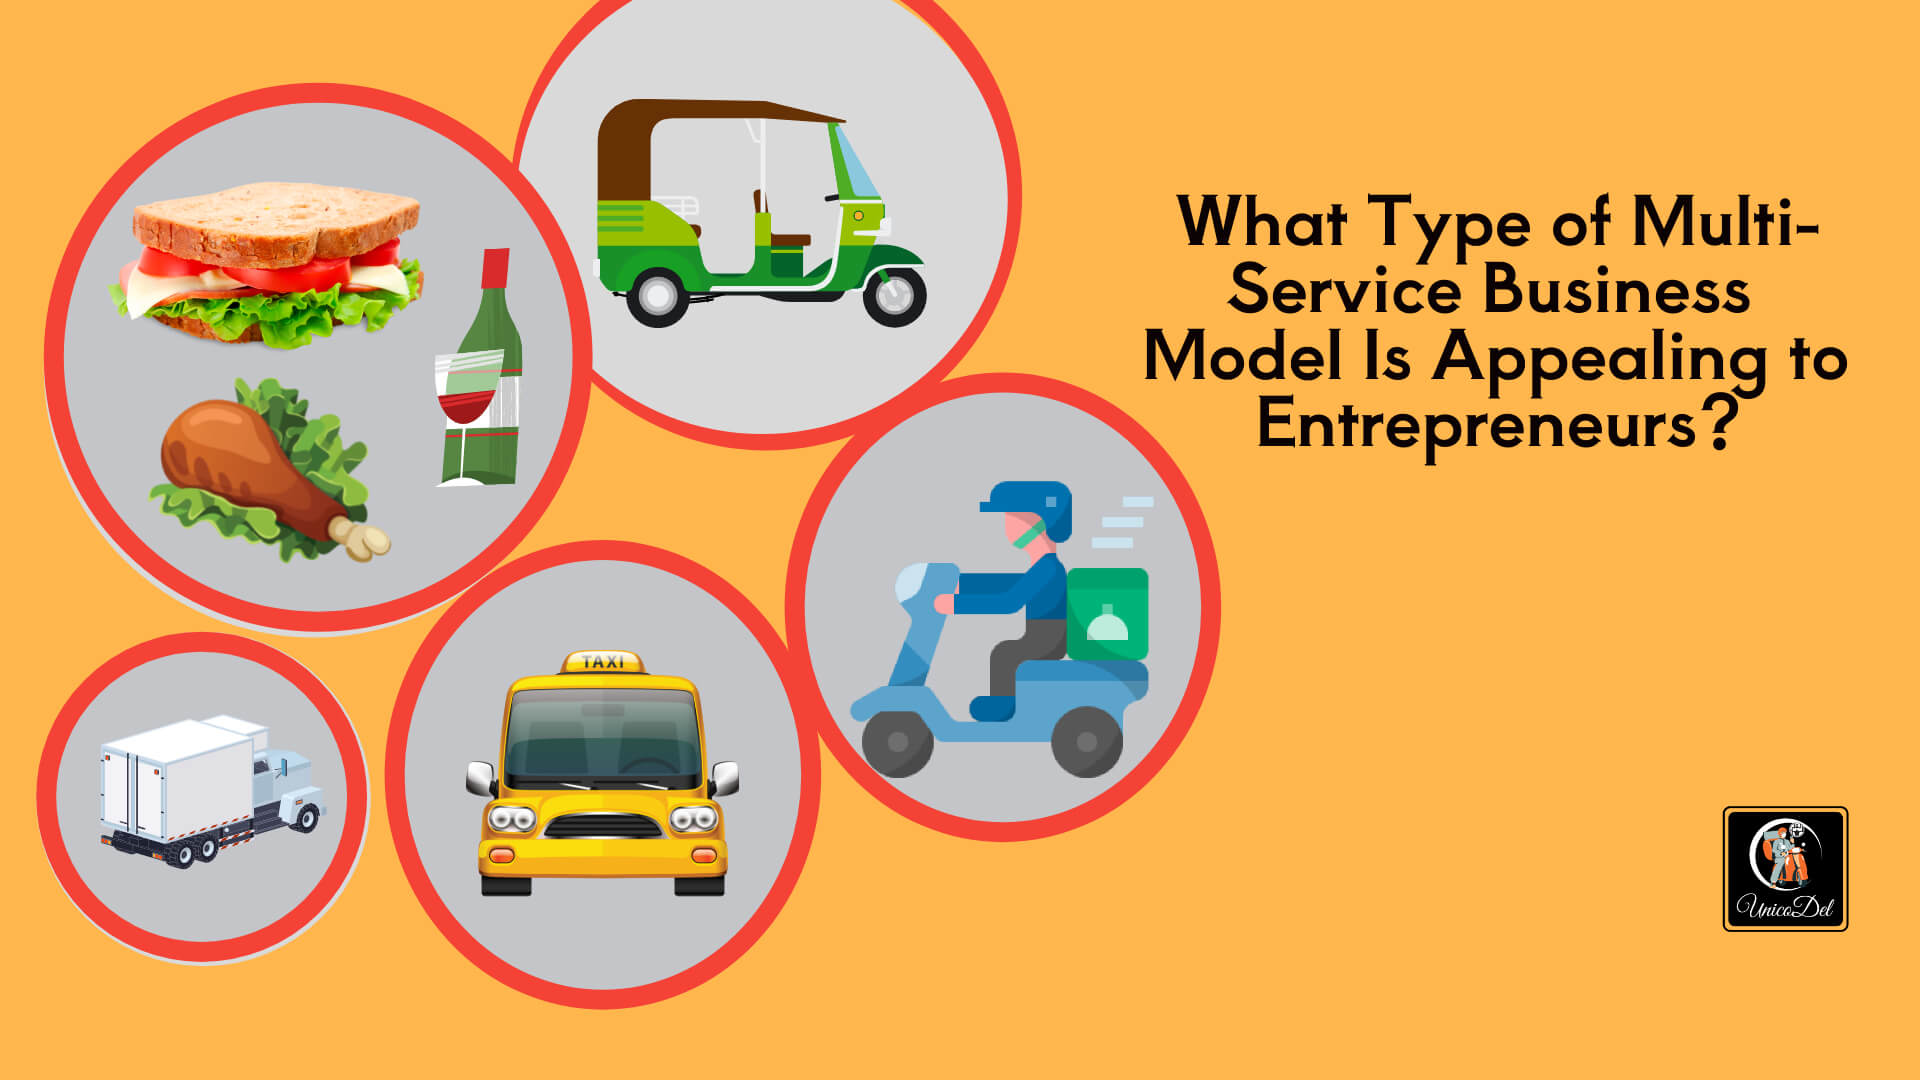 What Type of Multi-Service Business Model Is Appealing to